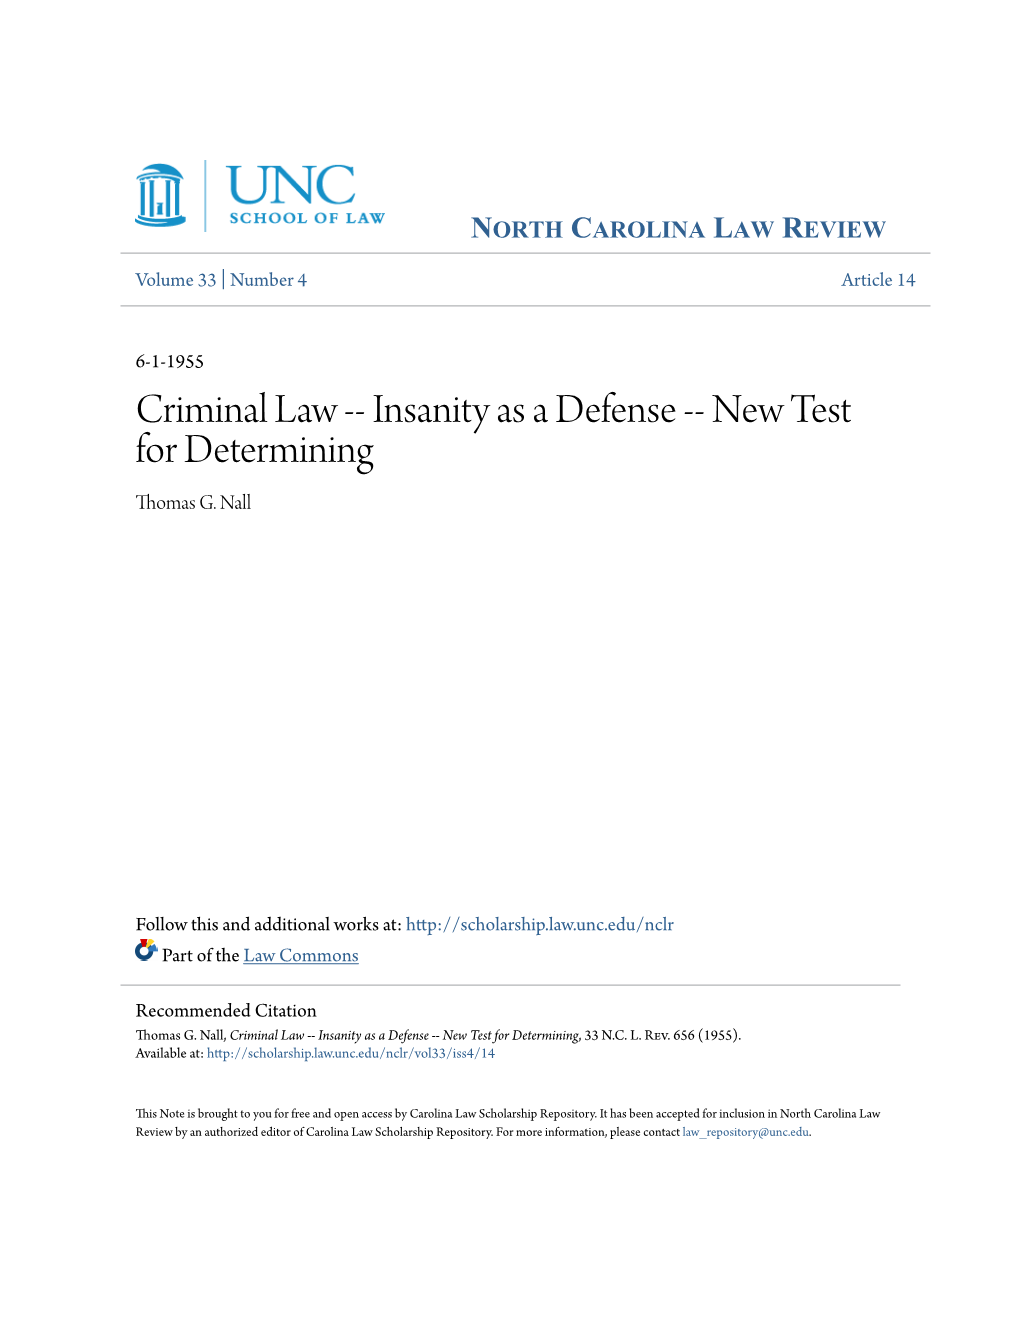 Criminal Law -- Insanity As a Defense -- New Test for Determining Thomas G